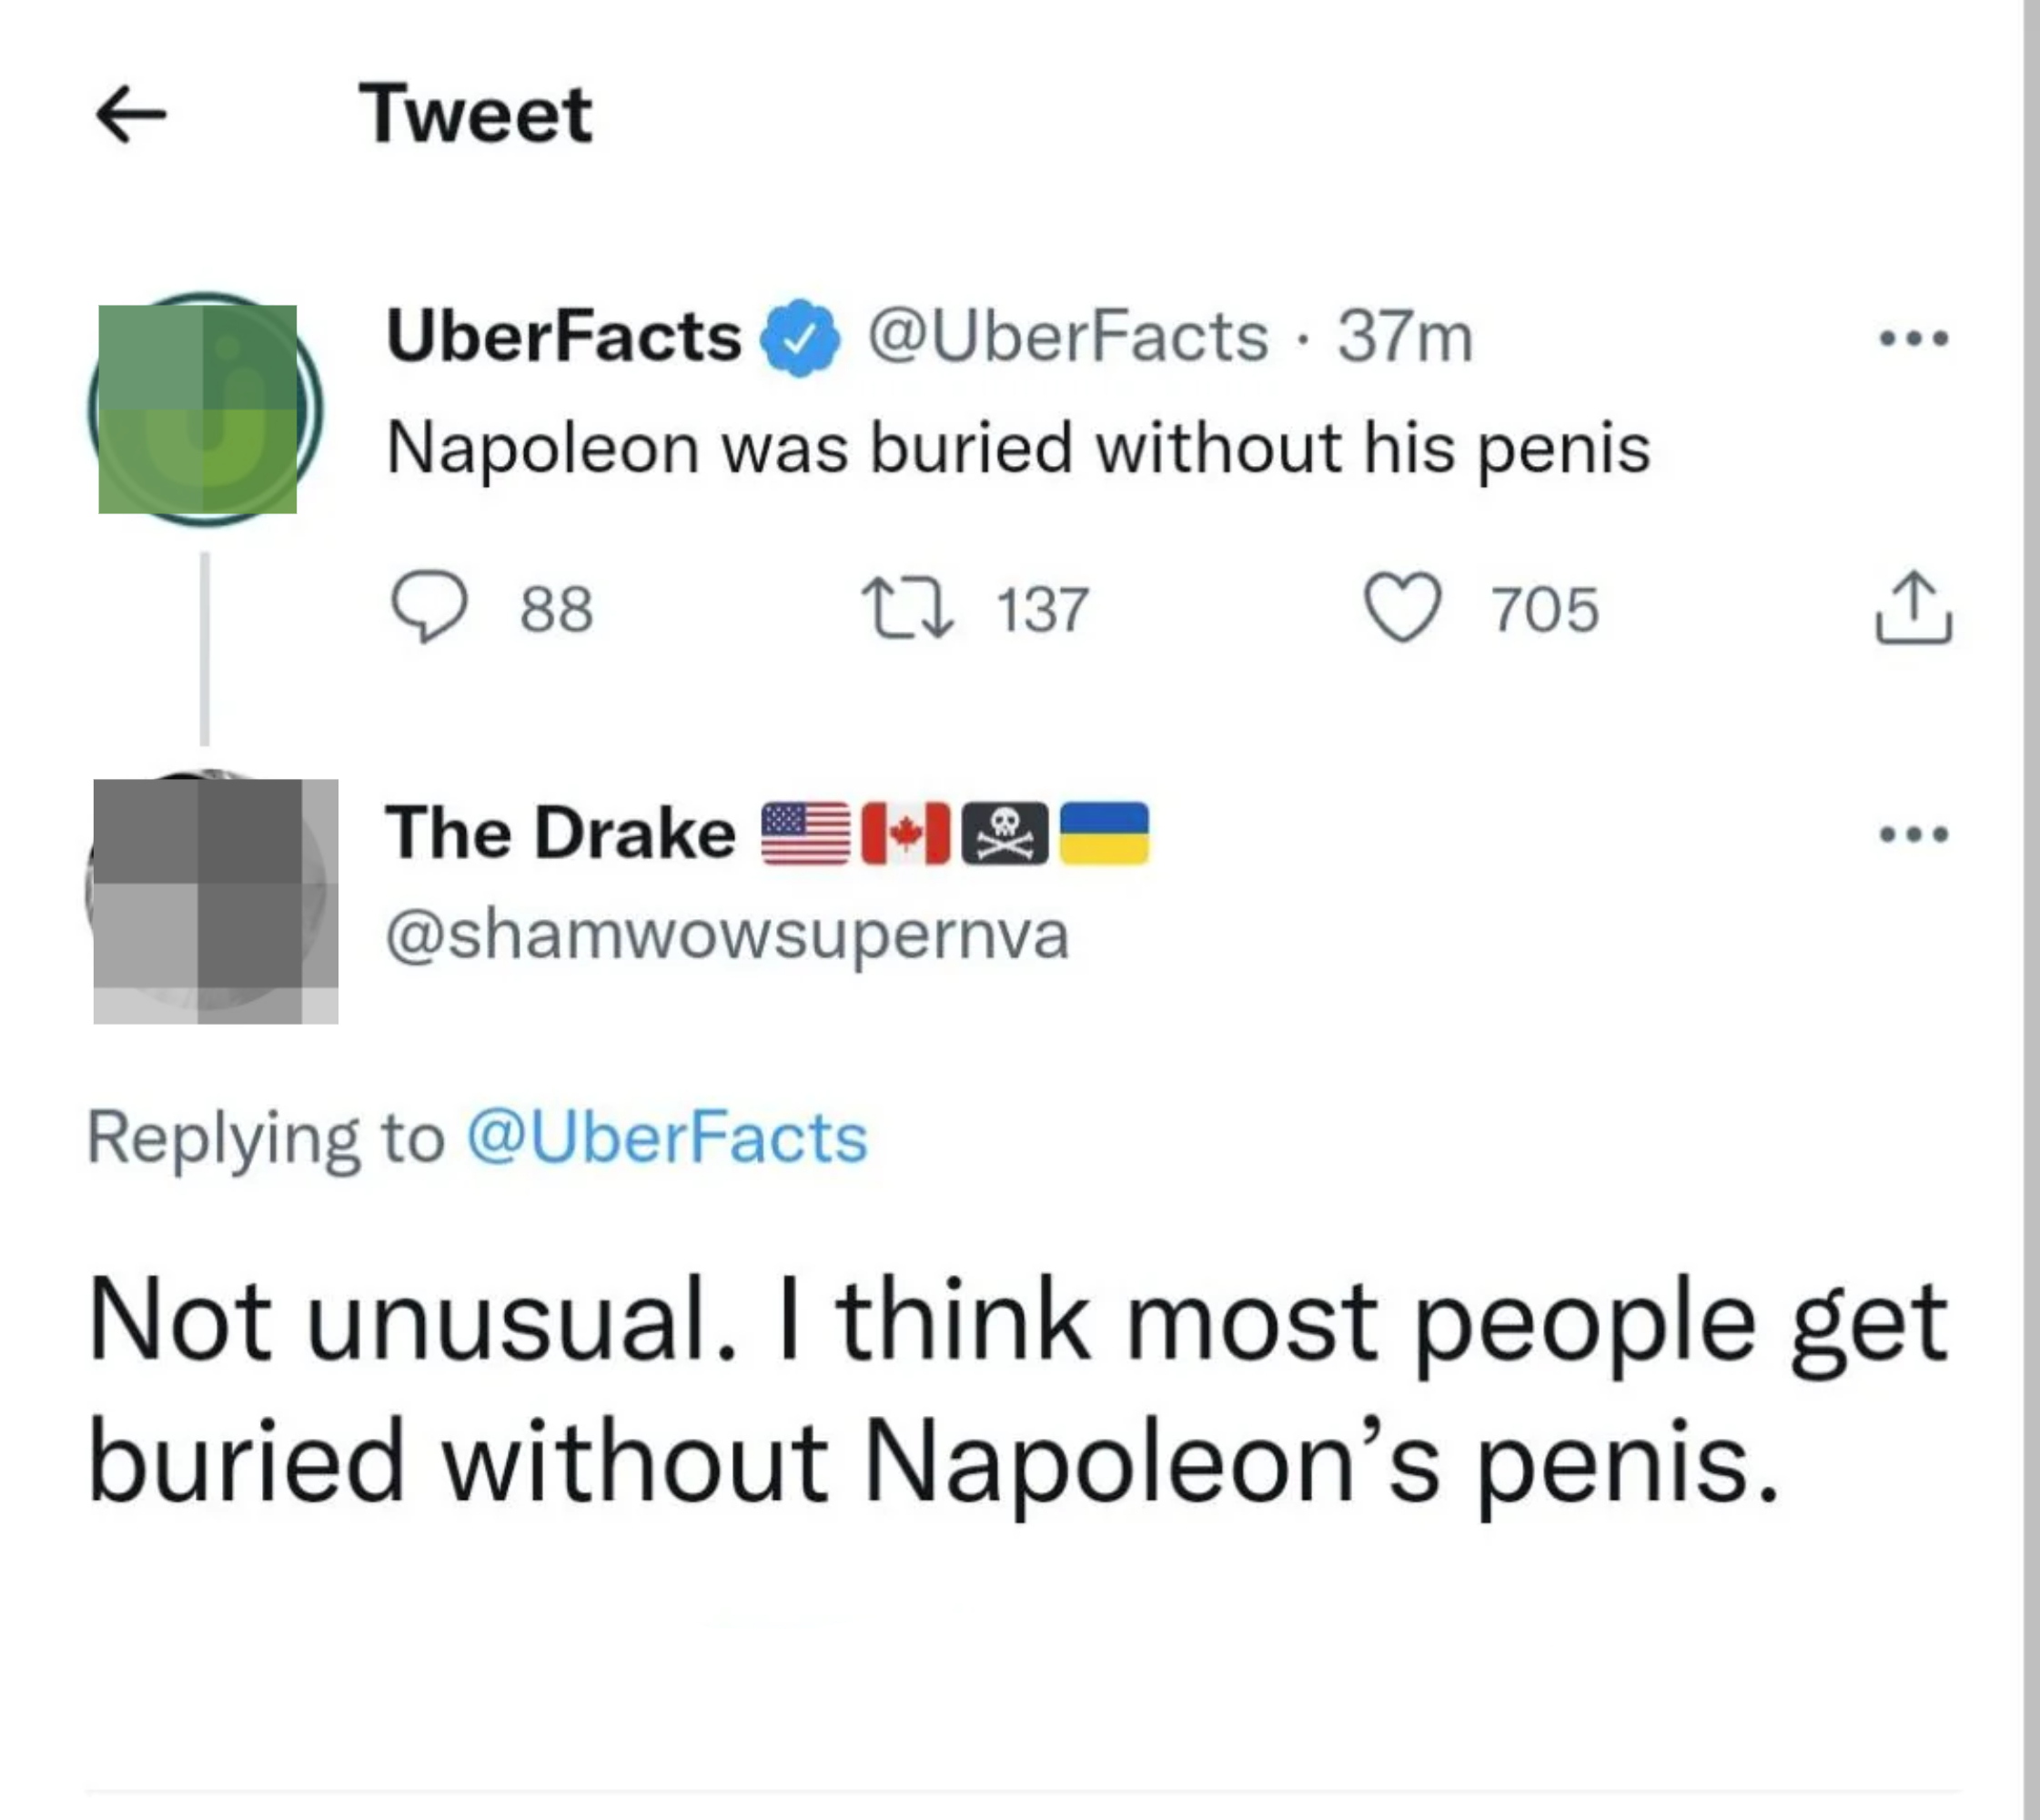 &quot;Napoleon was buried without his penis,&quot; &quot;Not unusual; I think most people get buried without Napoleon&#x27;s penis&quot;